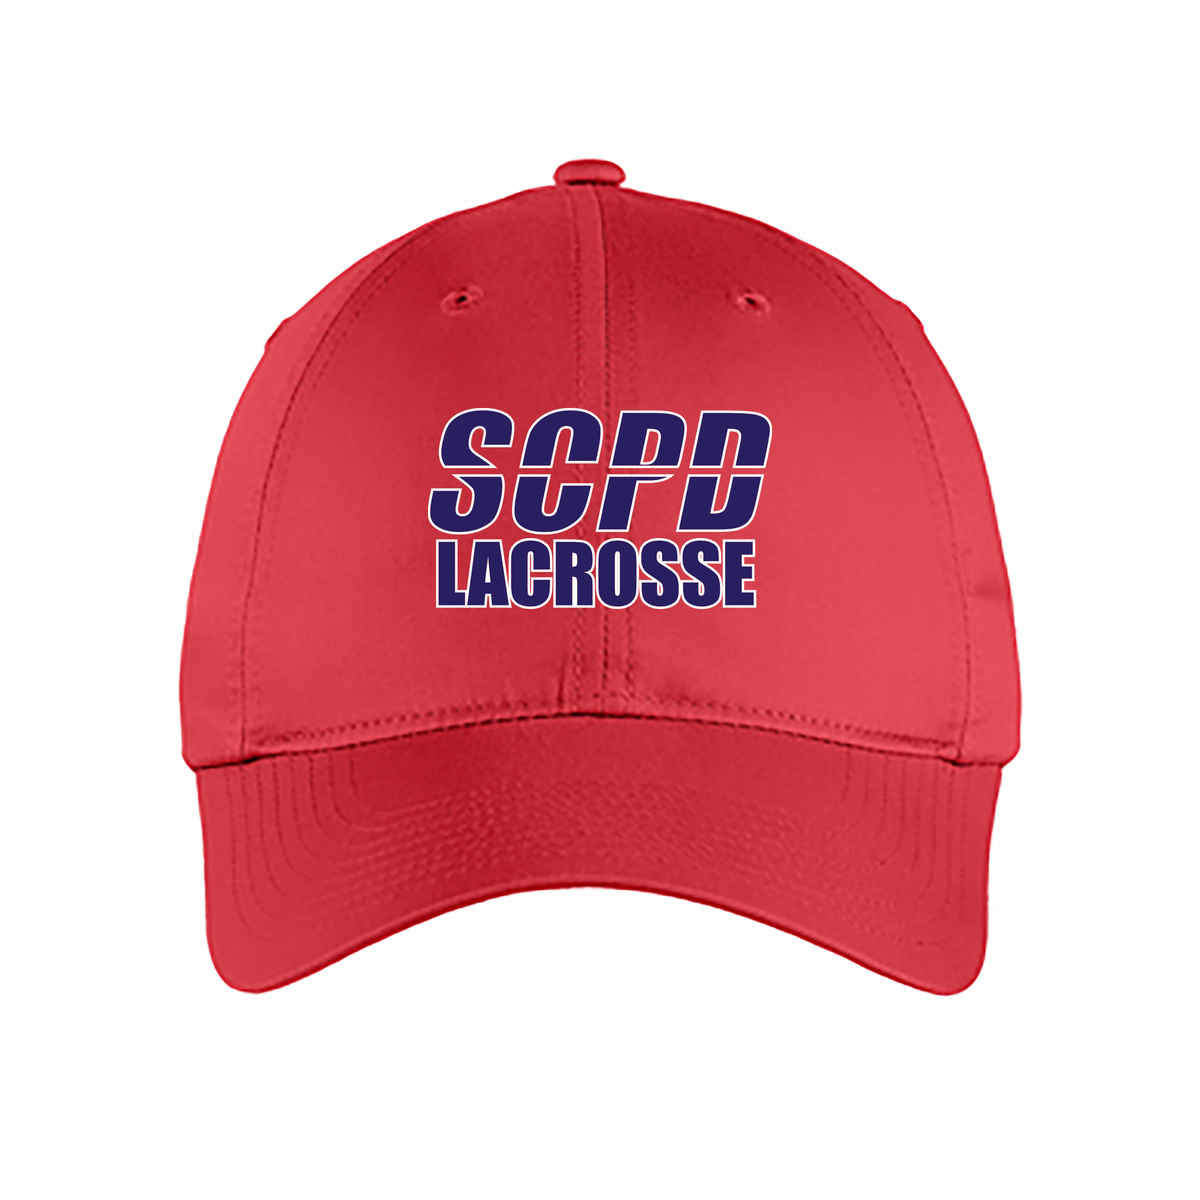 SCPD Lacrosse Nike Unstructured Twill Cap